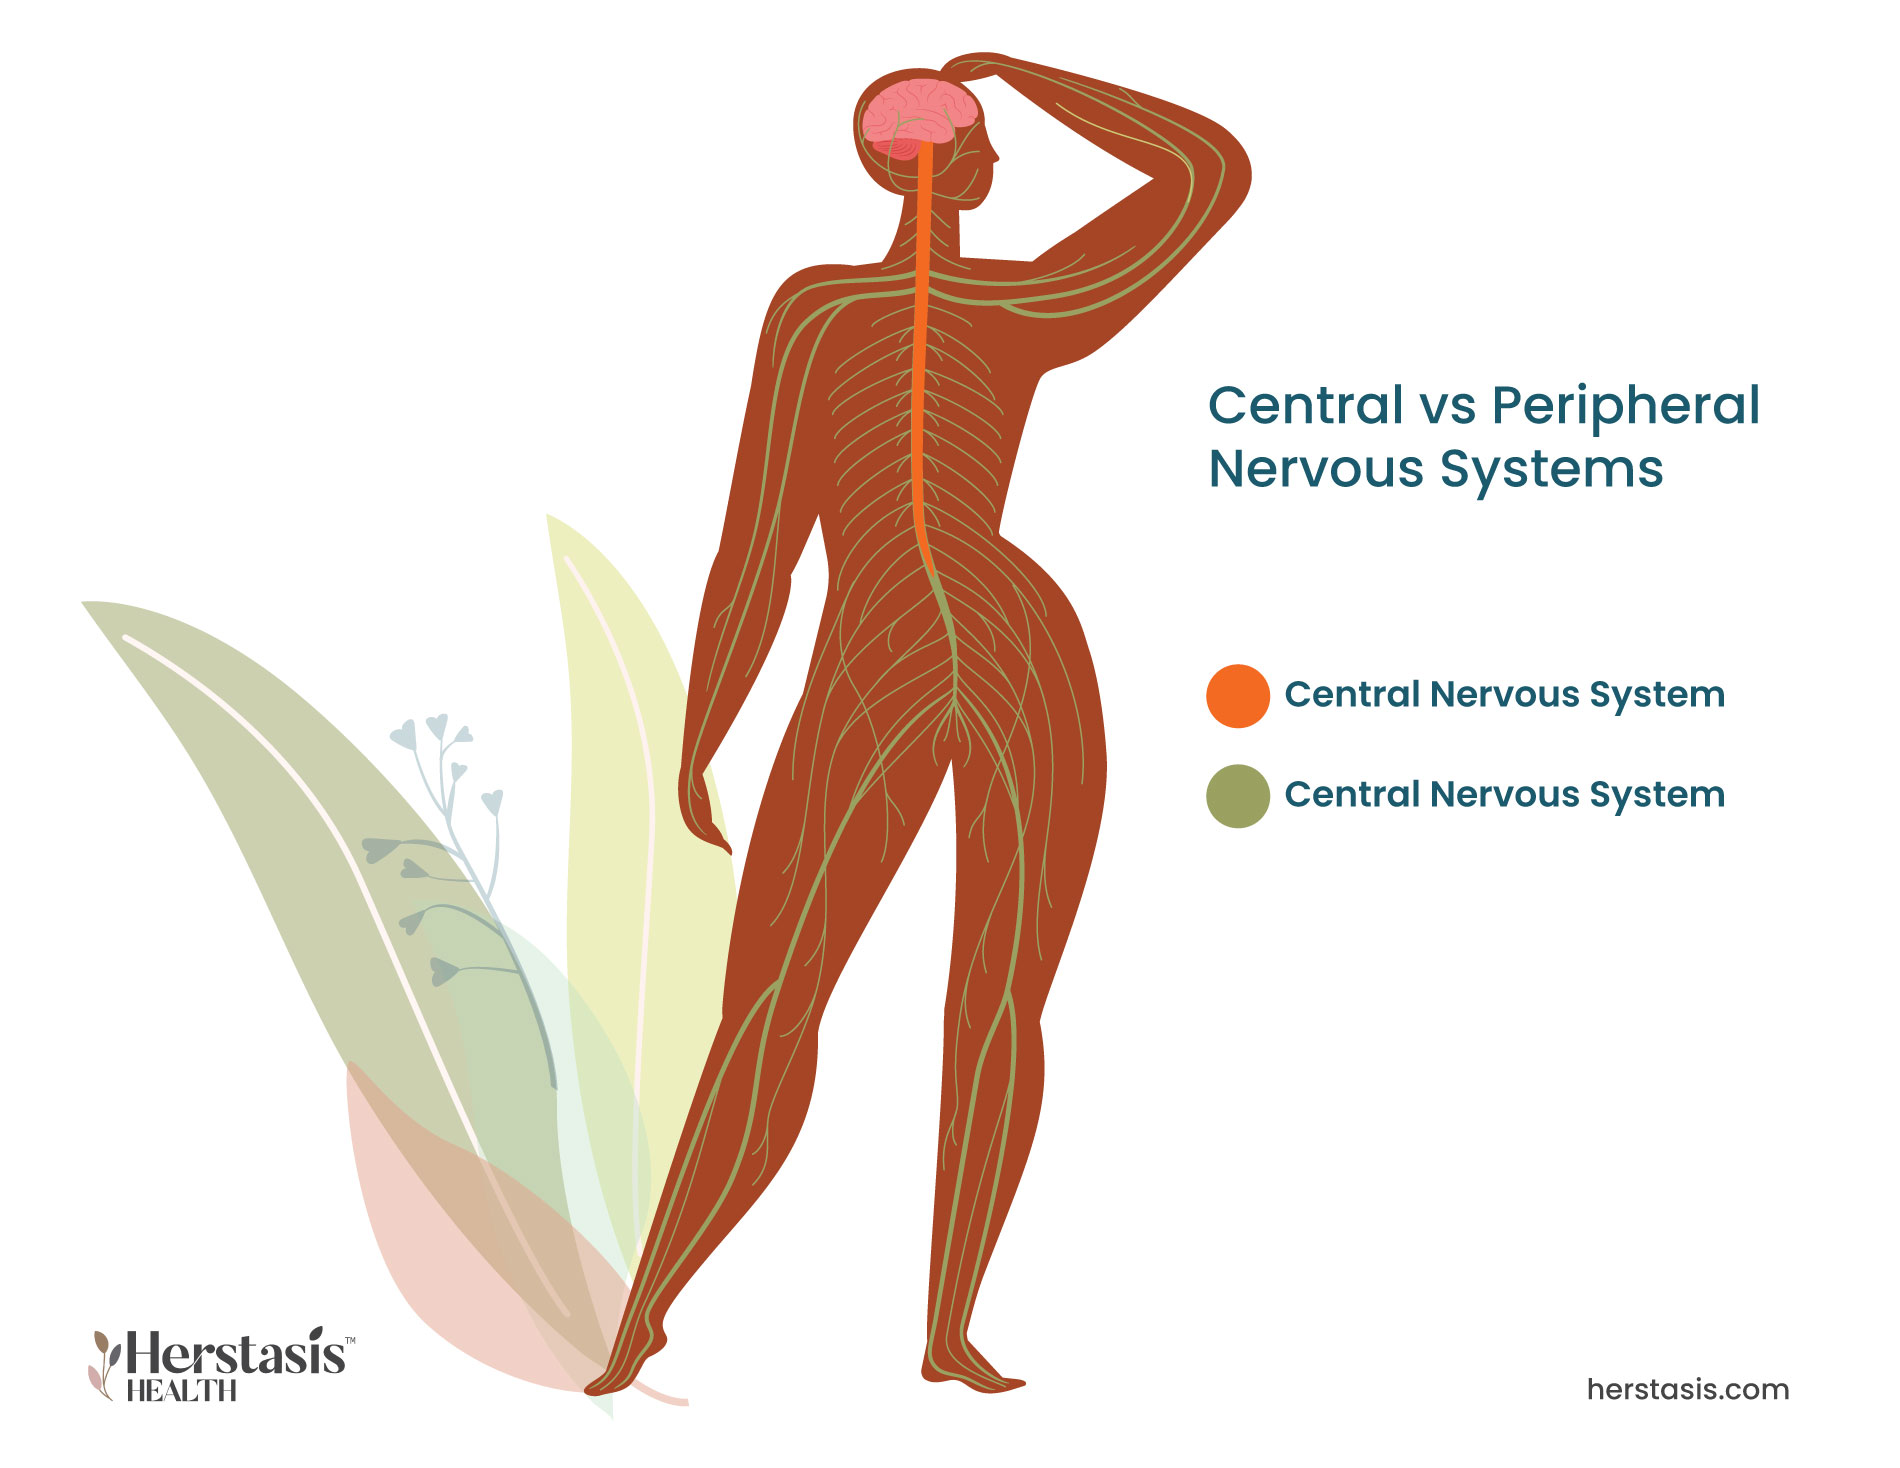 Image of the female body showing the central nervous system down the center and the peripheral nervous system along the sides of the body to the feet.